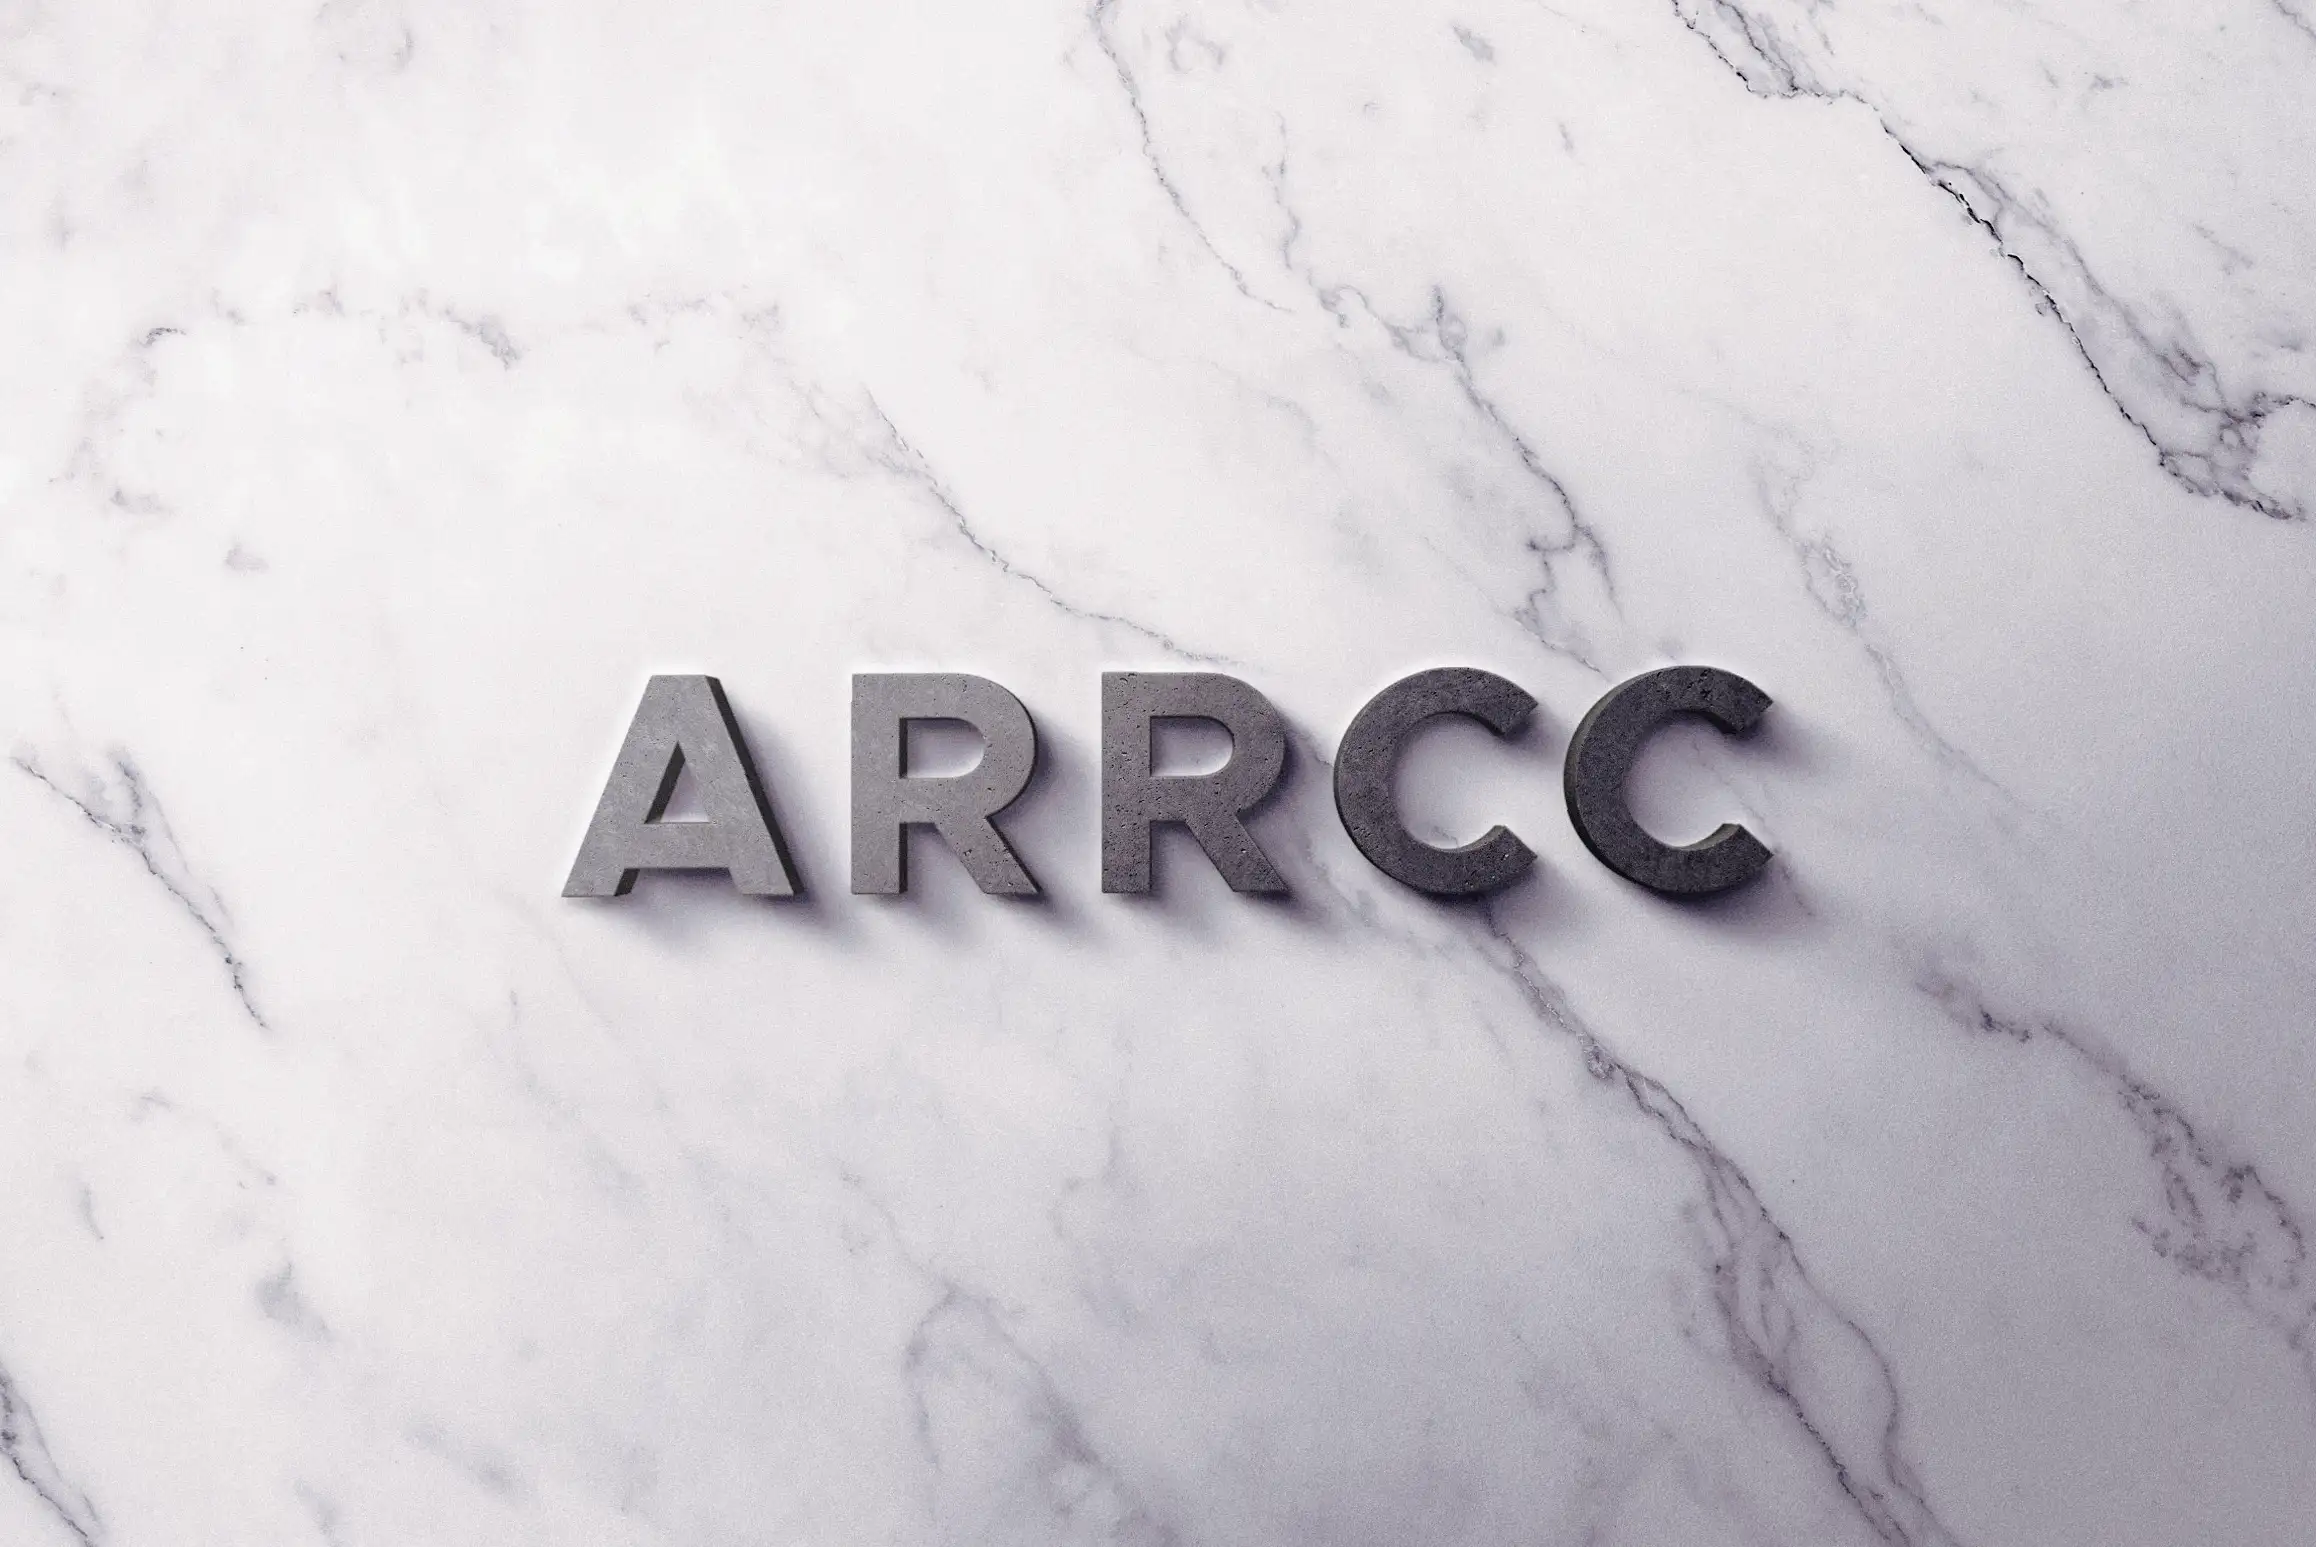 A logo for ARRCC an interior design company from Capet Town, South Africa.